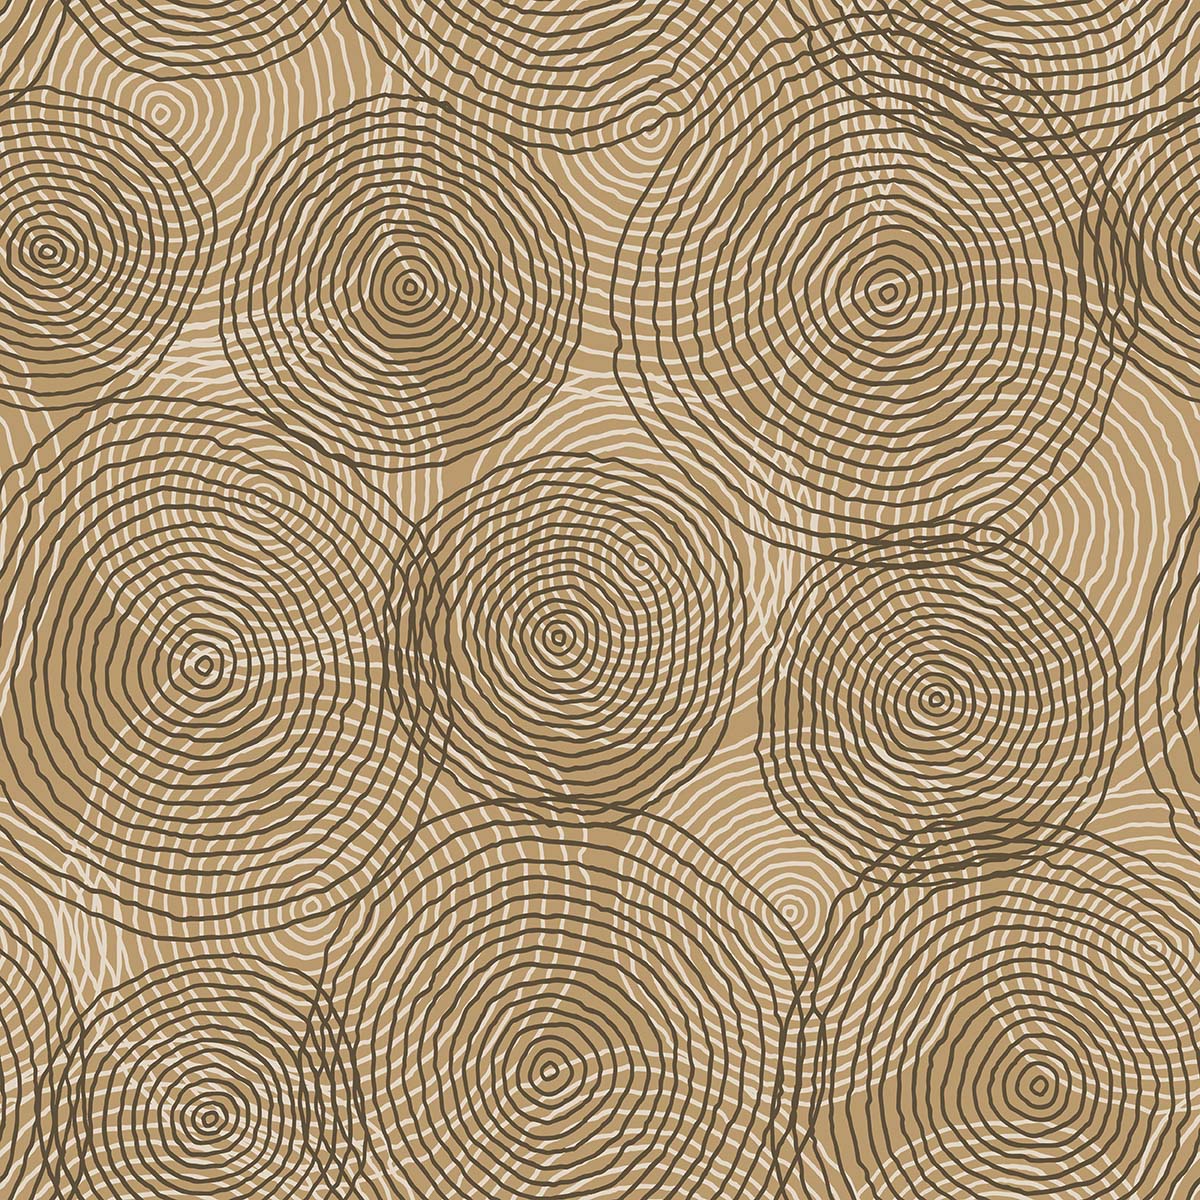 A pattern of circles on a brown background